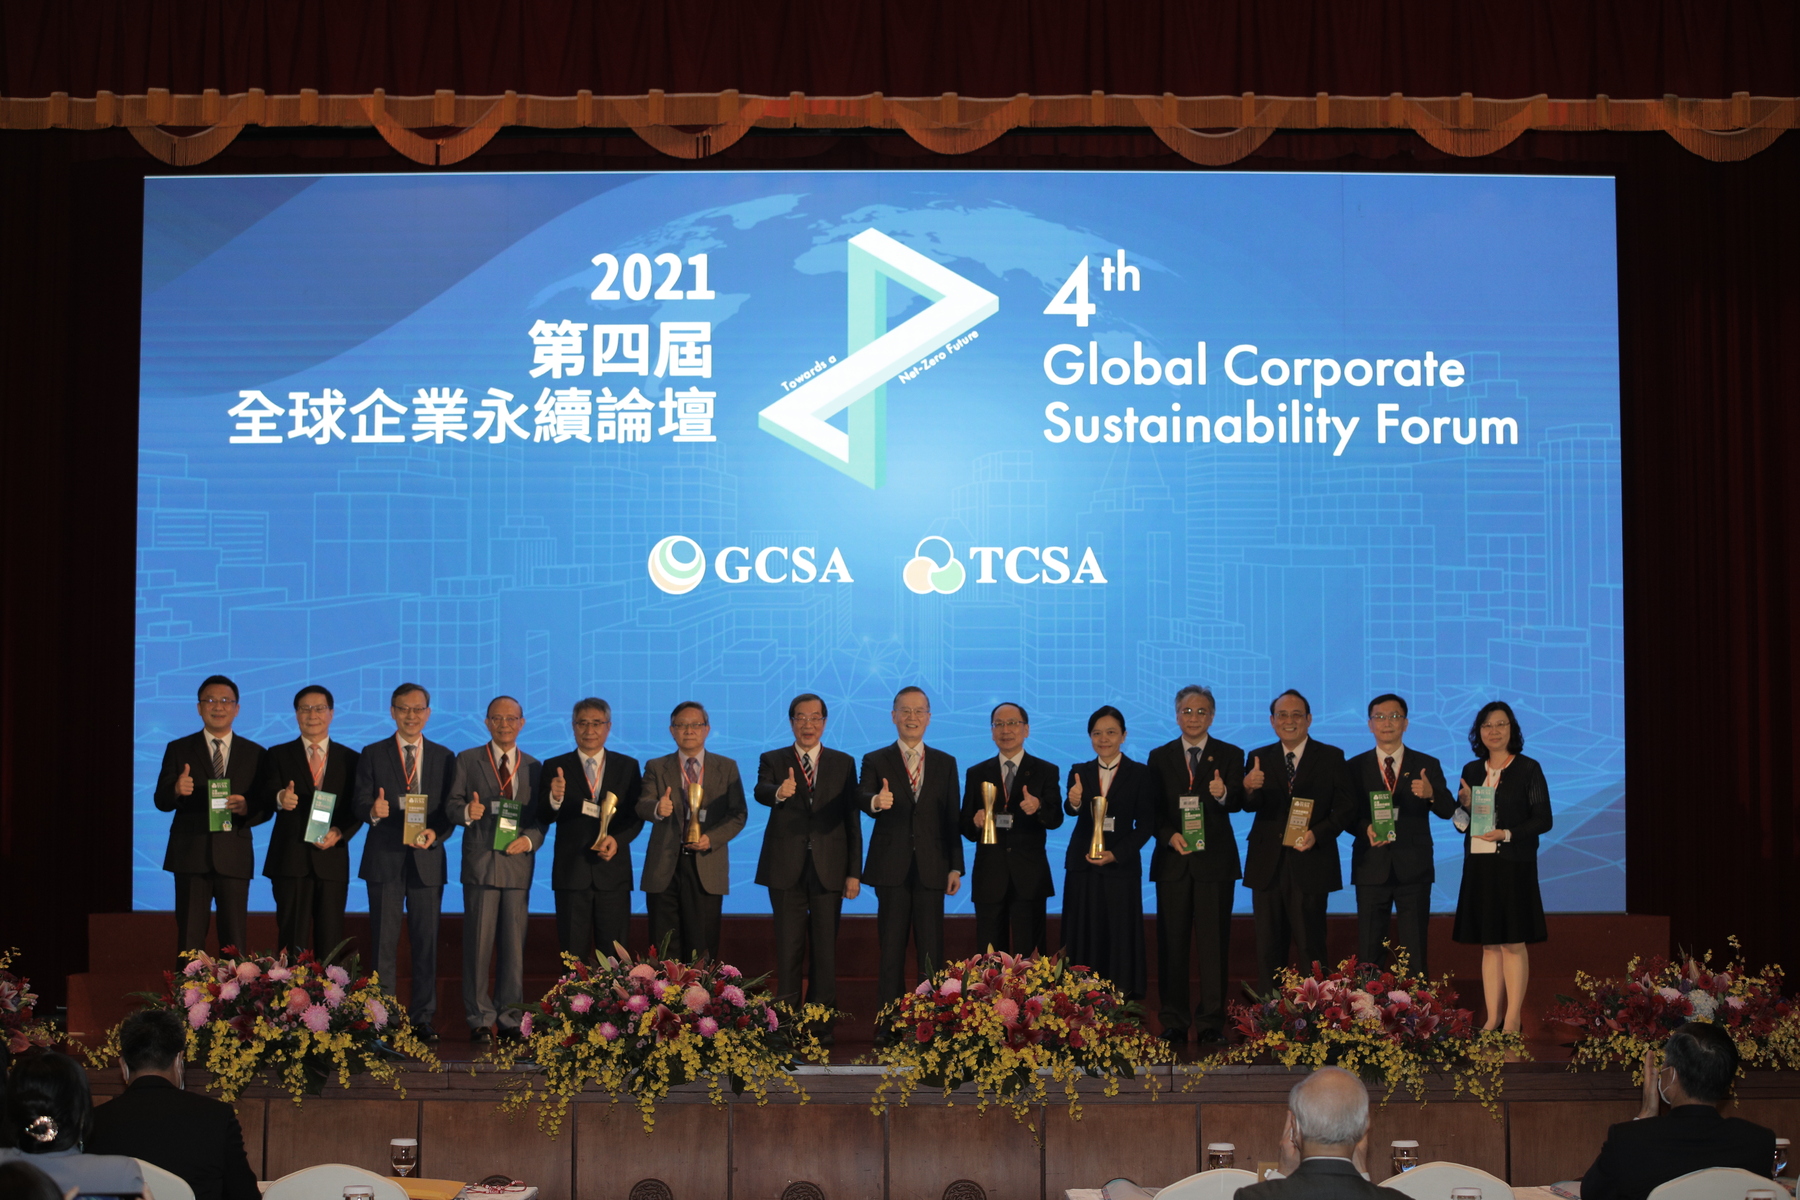 Representatives of the winning universities (Photo provided by TCSA)